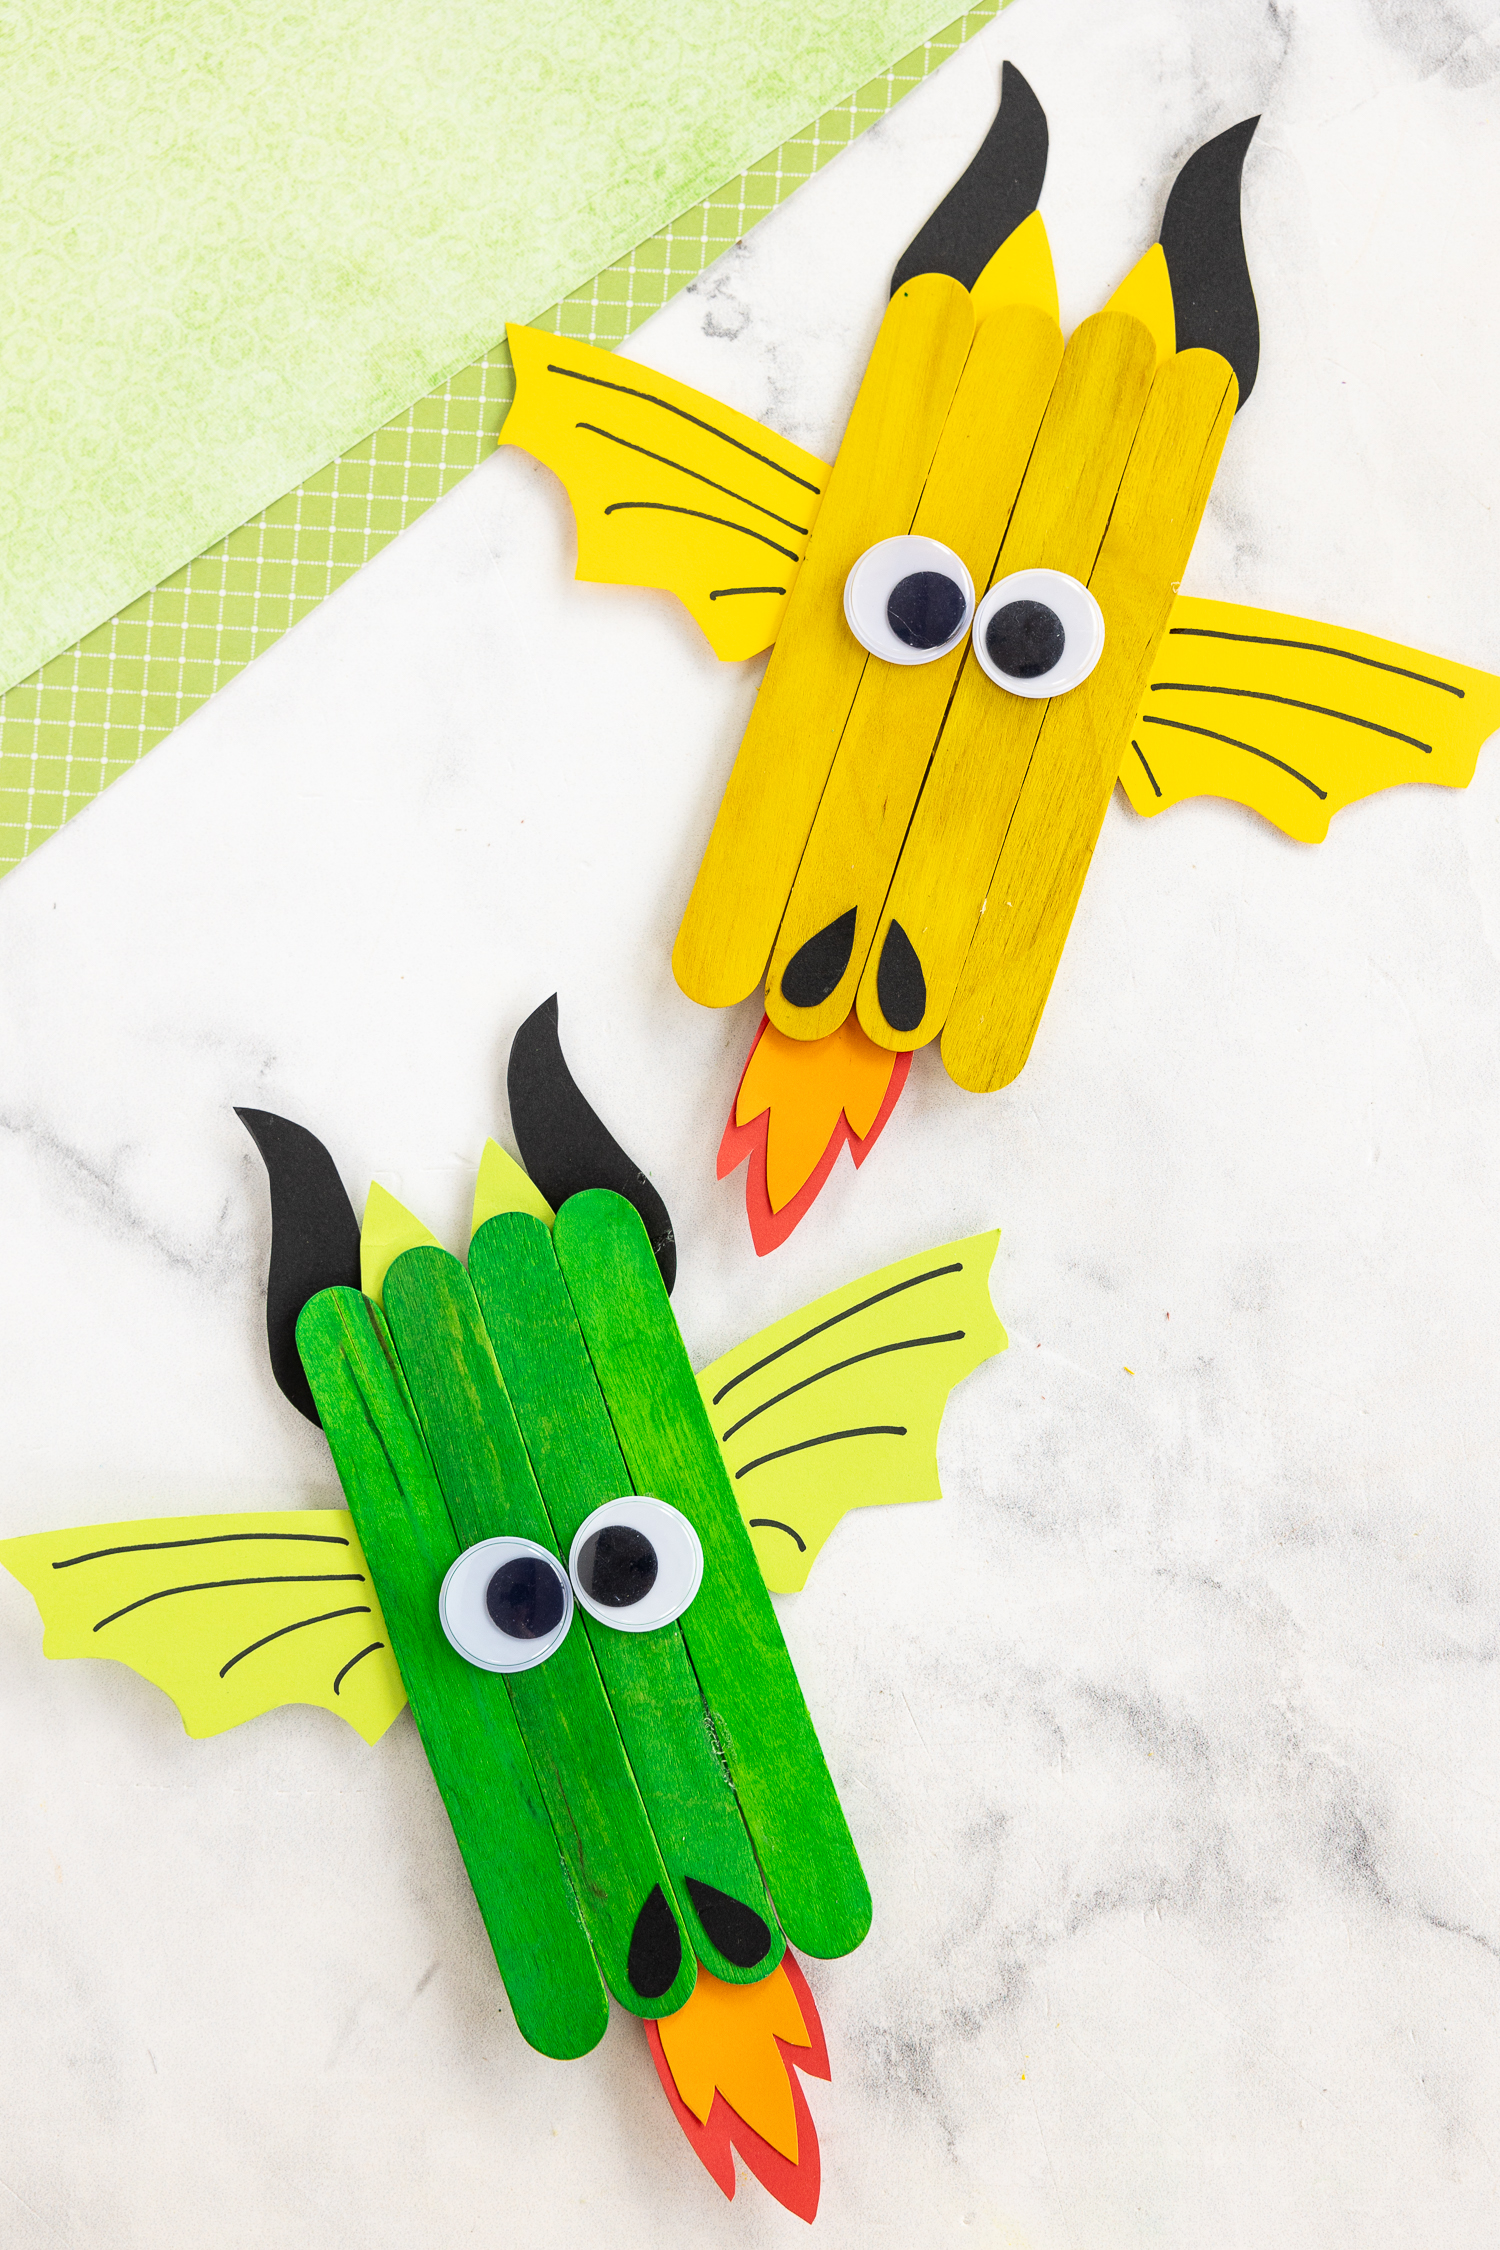 finished dragon craft on craft counter - green popsicle stick and yellow popsicle sticks with paper features